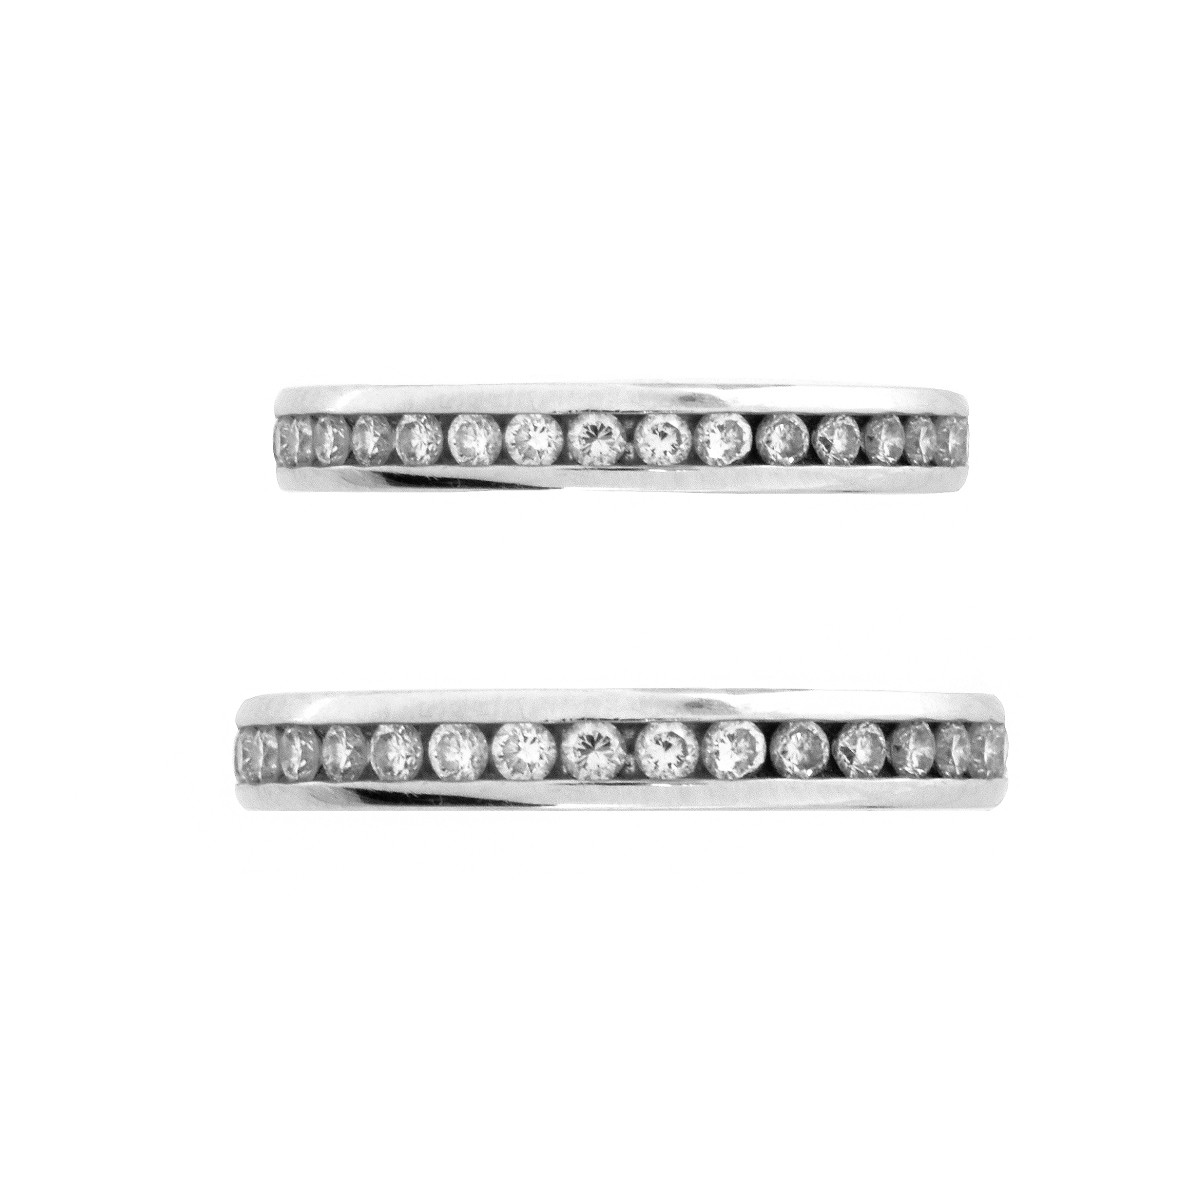 Two Diamond and 14K Eternity Bands